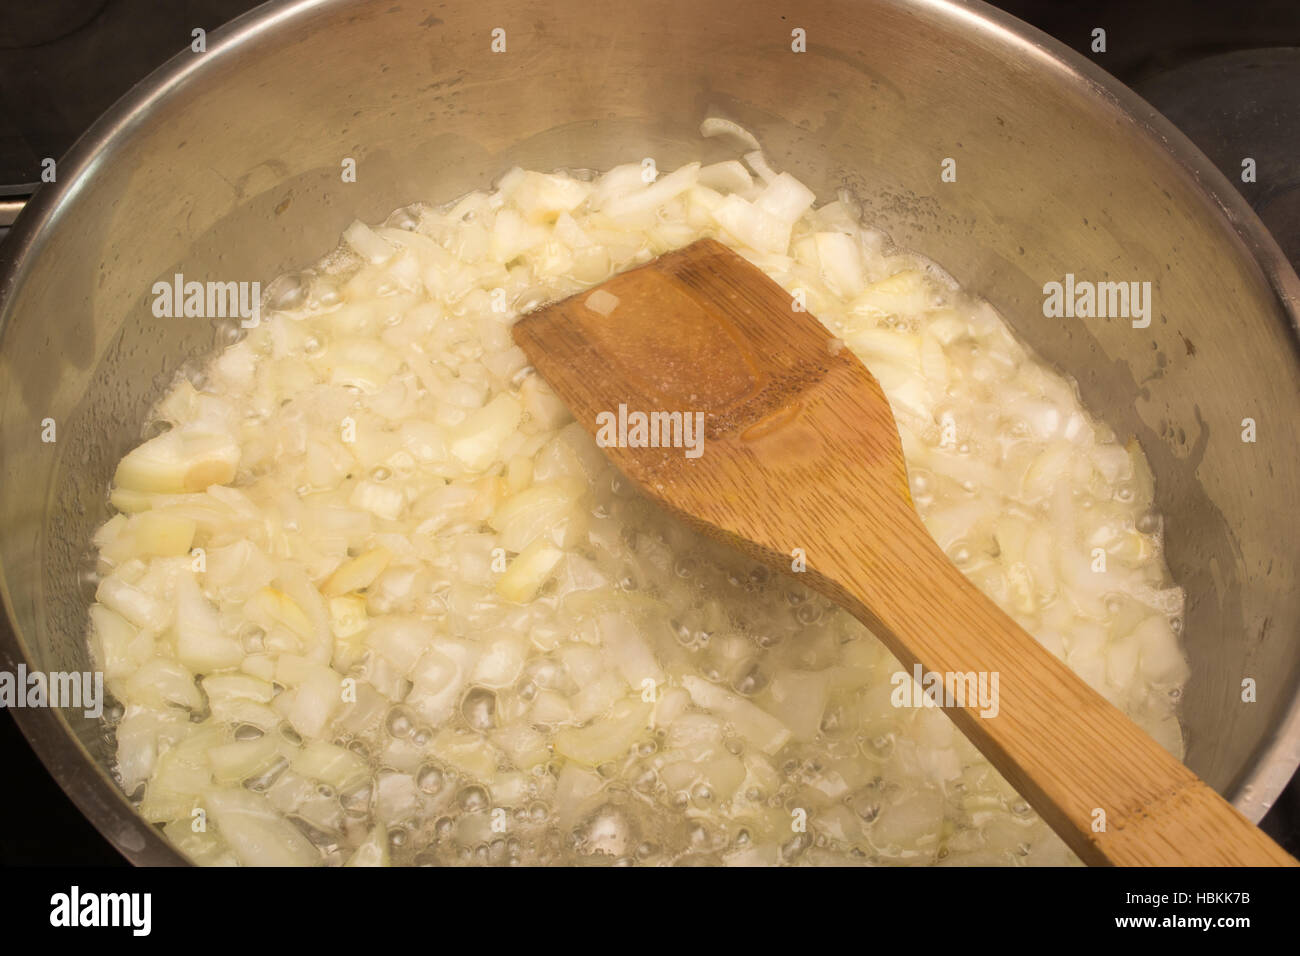 Frying onion in a pan Stock Photo